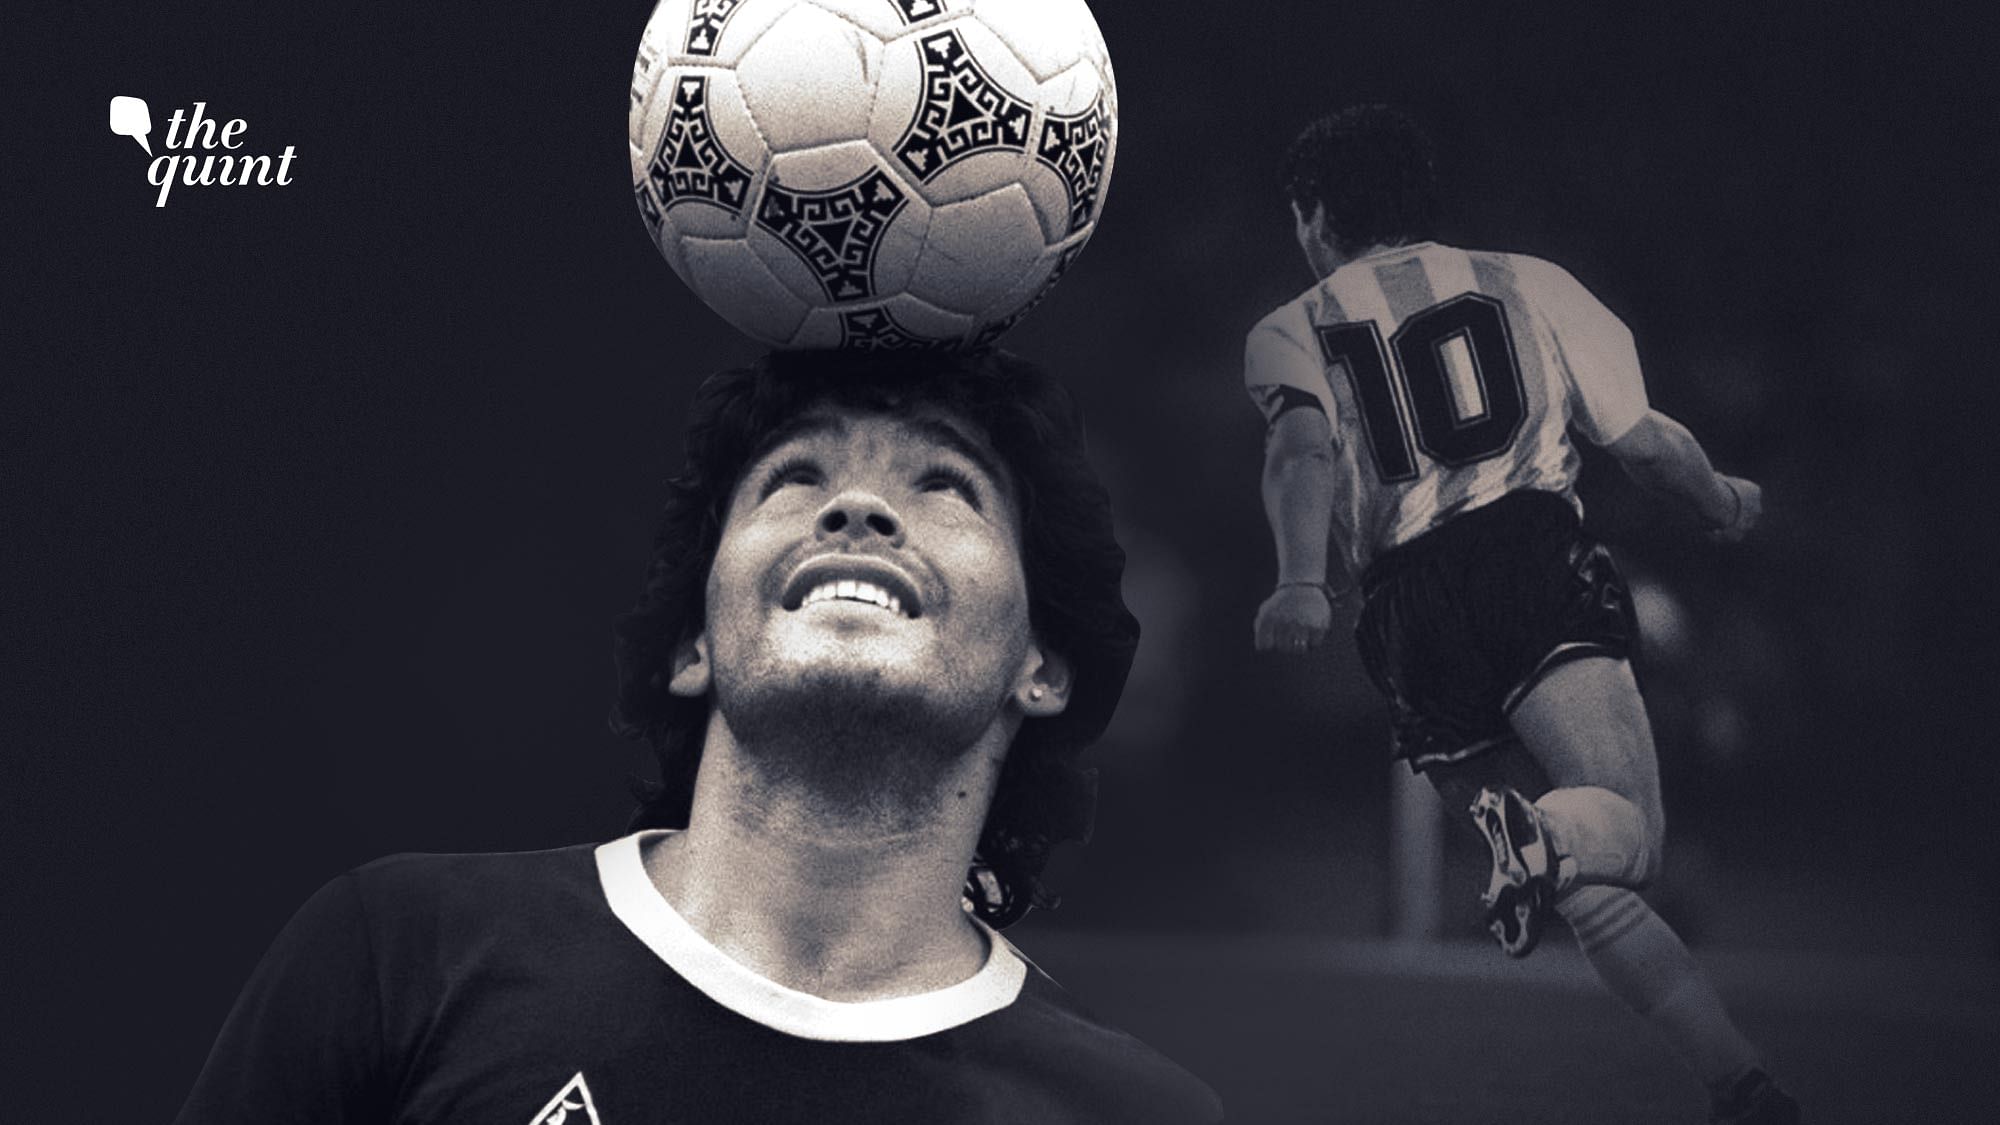 Remembering Diego Maradona, the football icon who will go down in history as one of the best players to have graced the pitched.